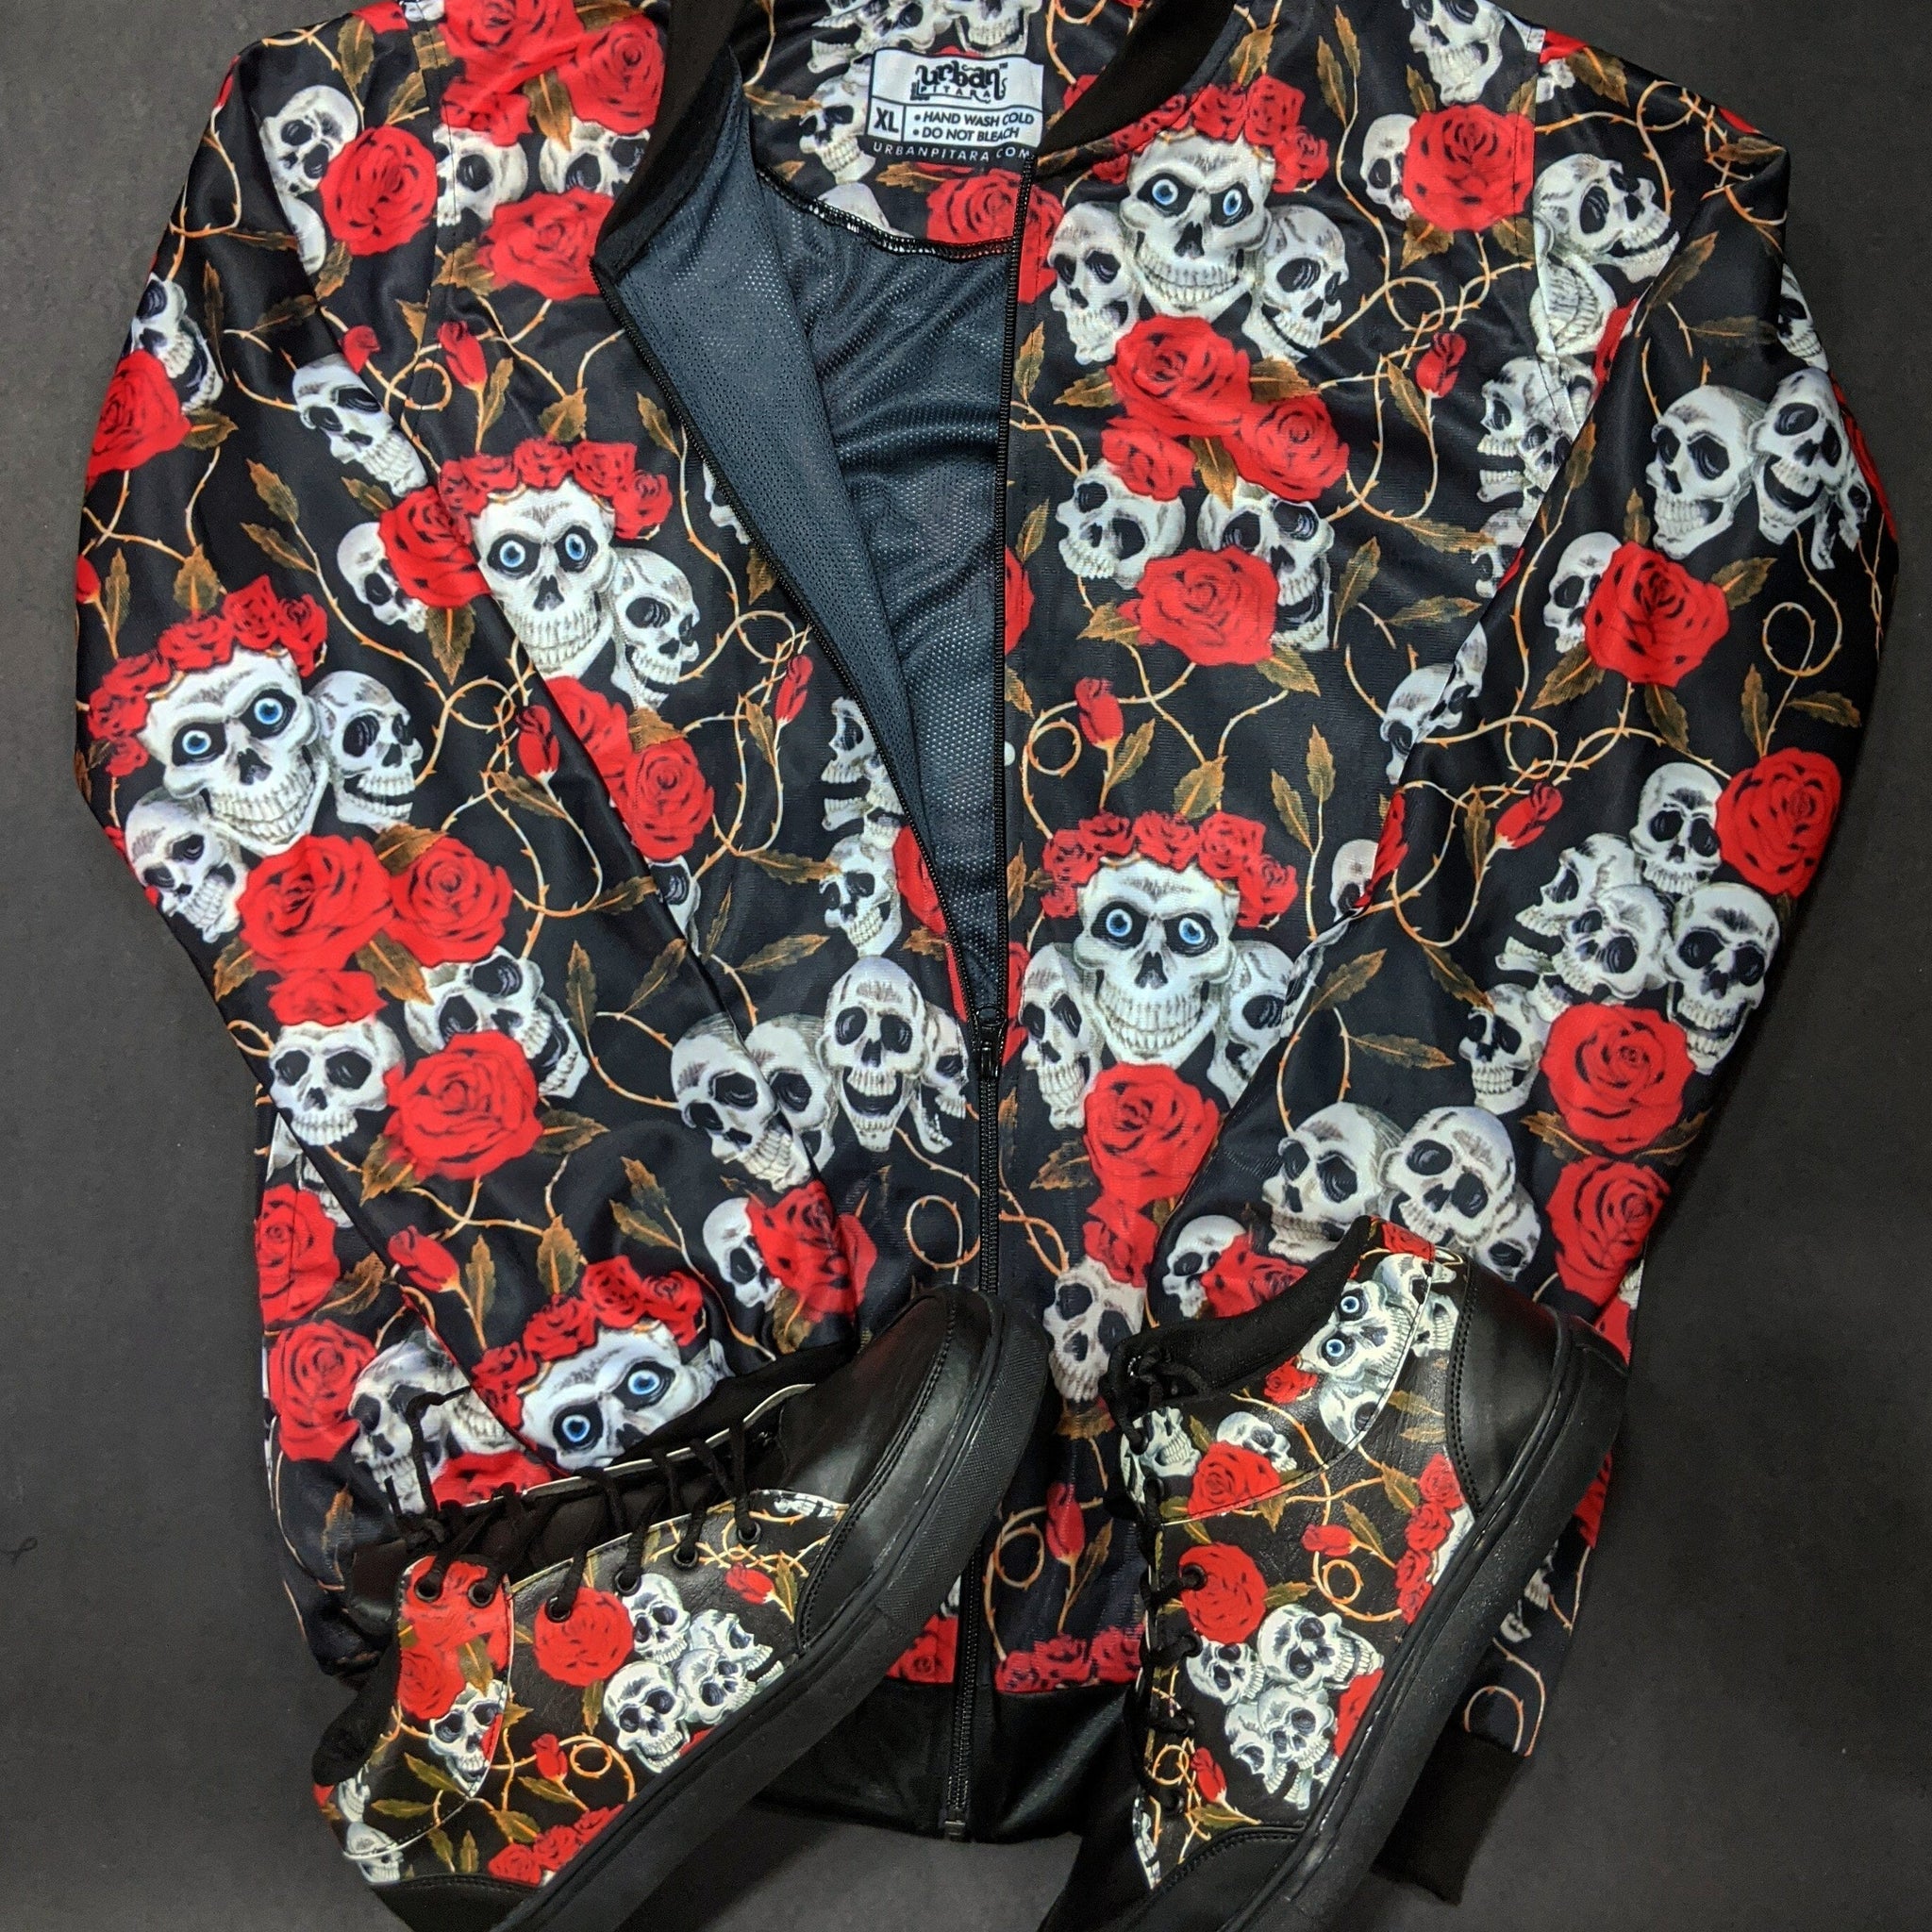 Skull Roses Bomber Jacket and Shoes Combo